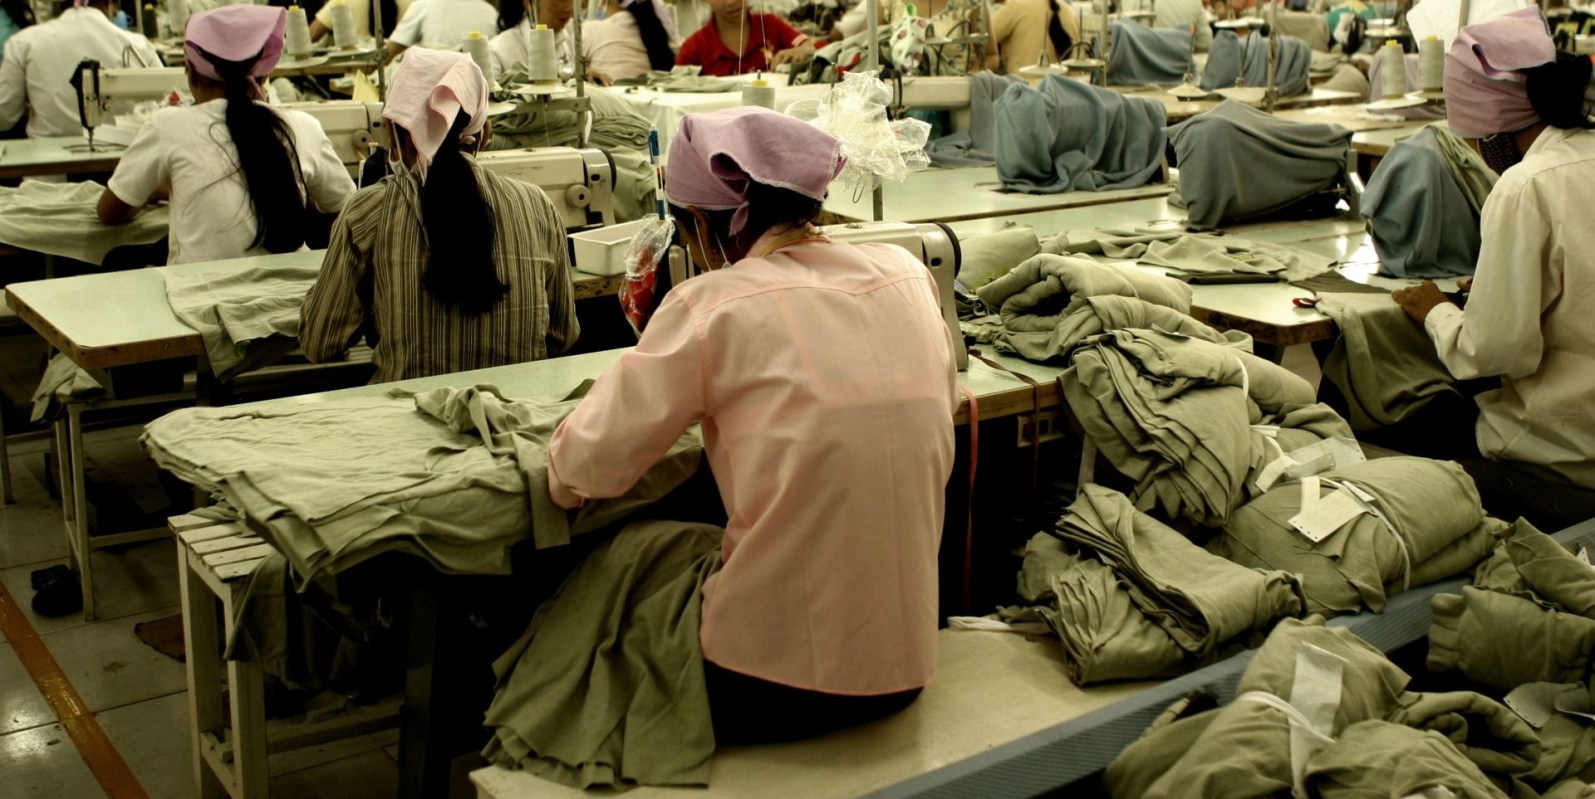 Human cost of fast fashion